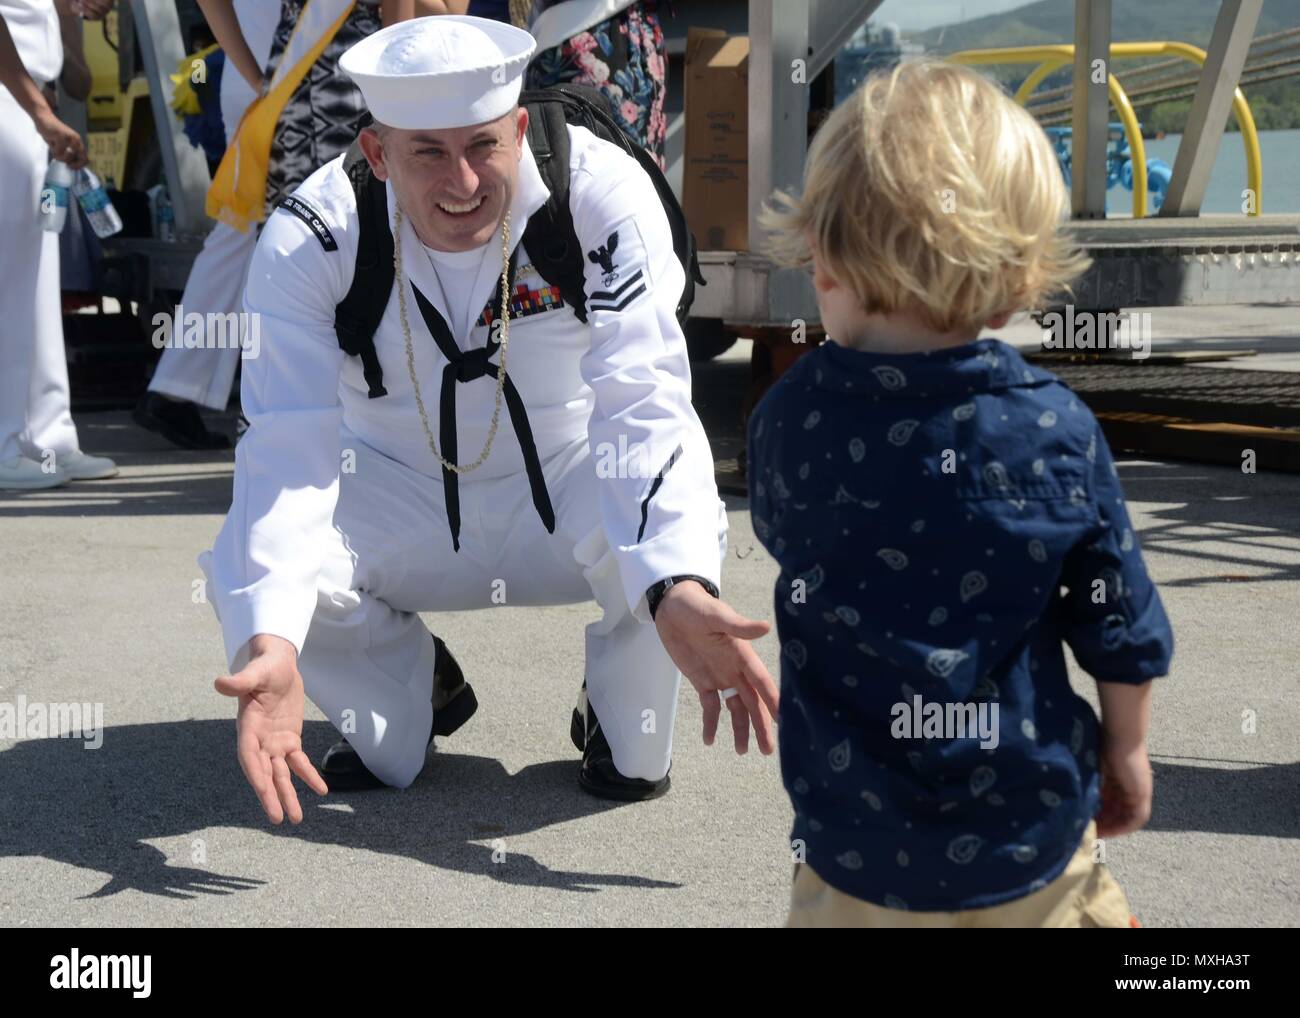 161108-N-WA347-139 SANTA RITA, Guam (Nov. 8, 2016) – Petty Officer 2nd Class Jay Cogger, native of Atlantic Beach, N.C., assigned to the submarine tender USS Frank Cable (AS 40), greets his son on the pier at Naval Base Guam after completing a five-month deployment, Nov. 8.  Frank Cable departed Guam June 6, was a persistent presence throughout the Indo-Asia-Pacific region during its deployment providing vital flexibility to the fleet commanders, extending the range and impact of U.S. naval forces in the U.S. Navy’s 5th and 7th Fleets.  Forward deployed to Guam, Frank Cable’s combined Navy and Stock Photo